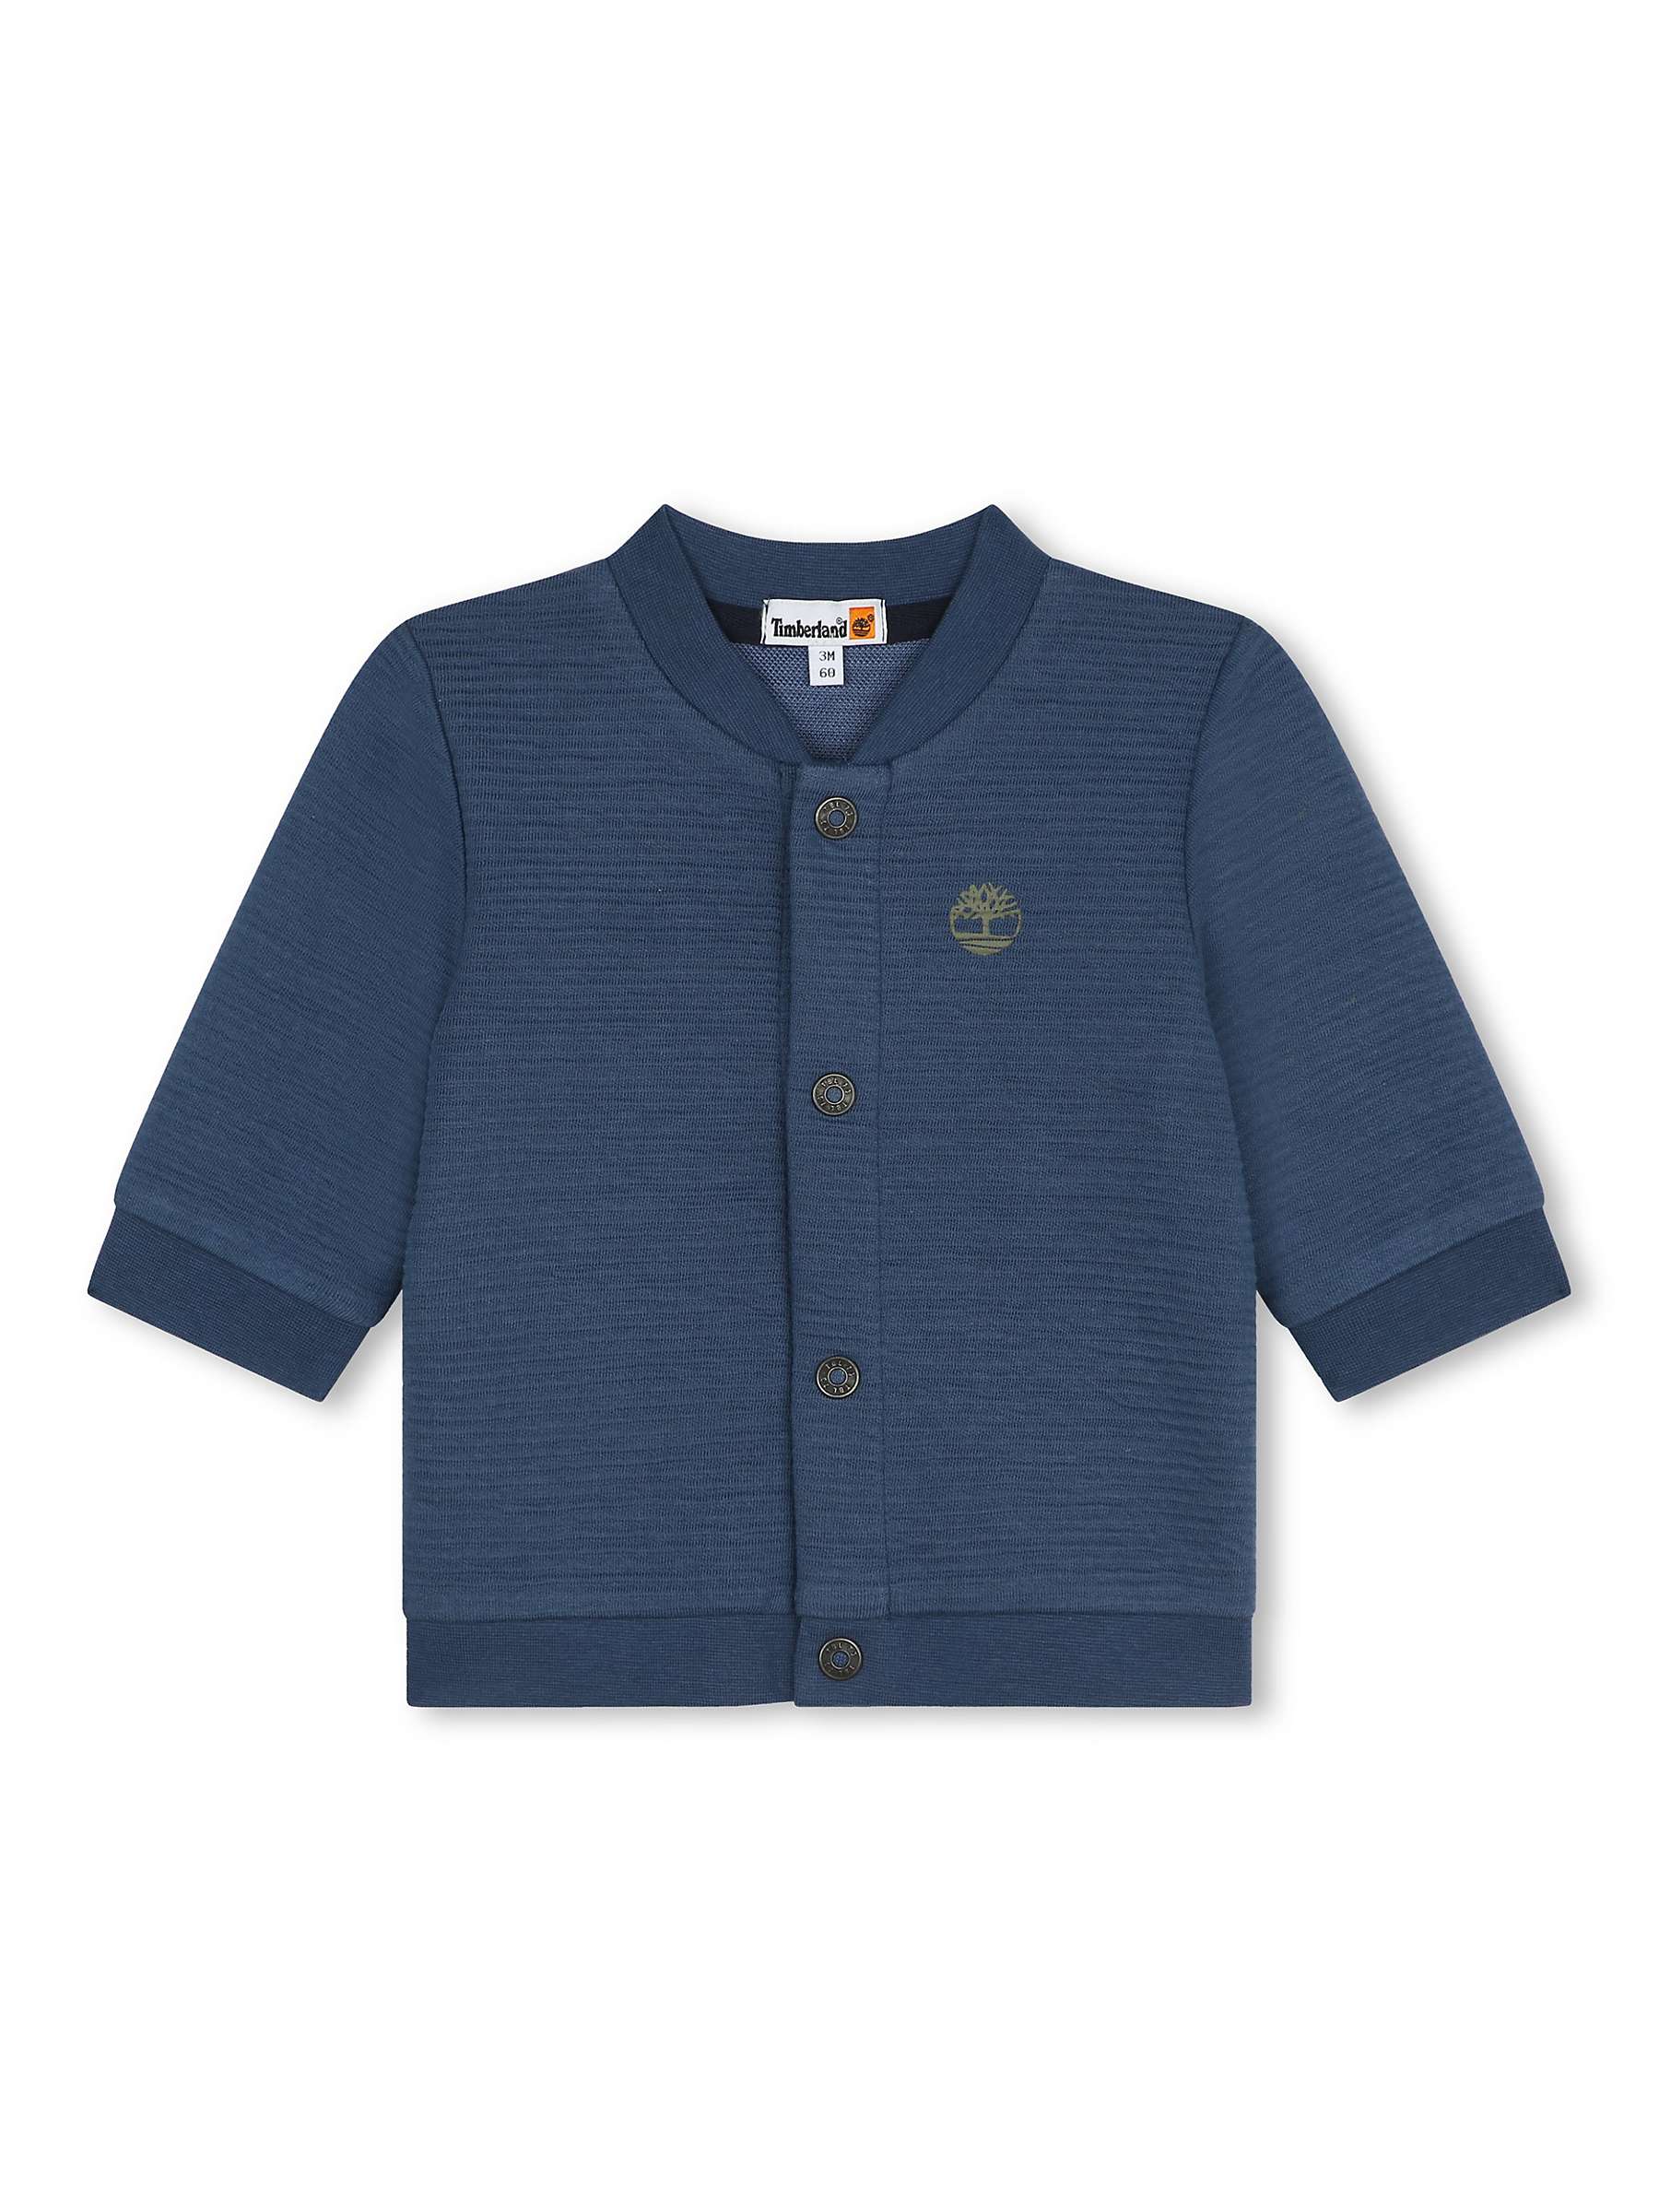 Buy Timberland Baby Travel With Your Friends, Jacket, Shorts & T-Shirt Set, Blue/Multi Online at johnlewis.com